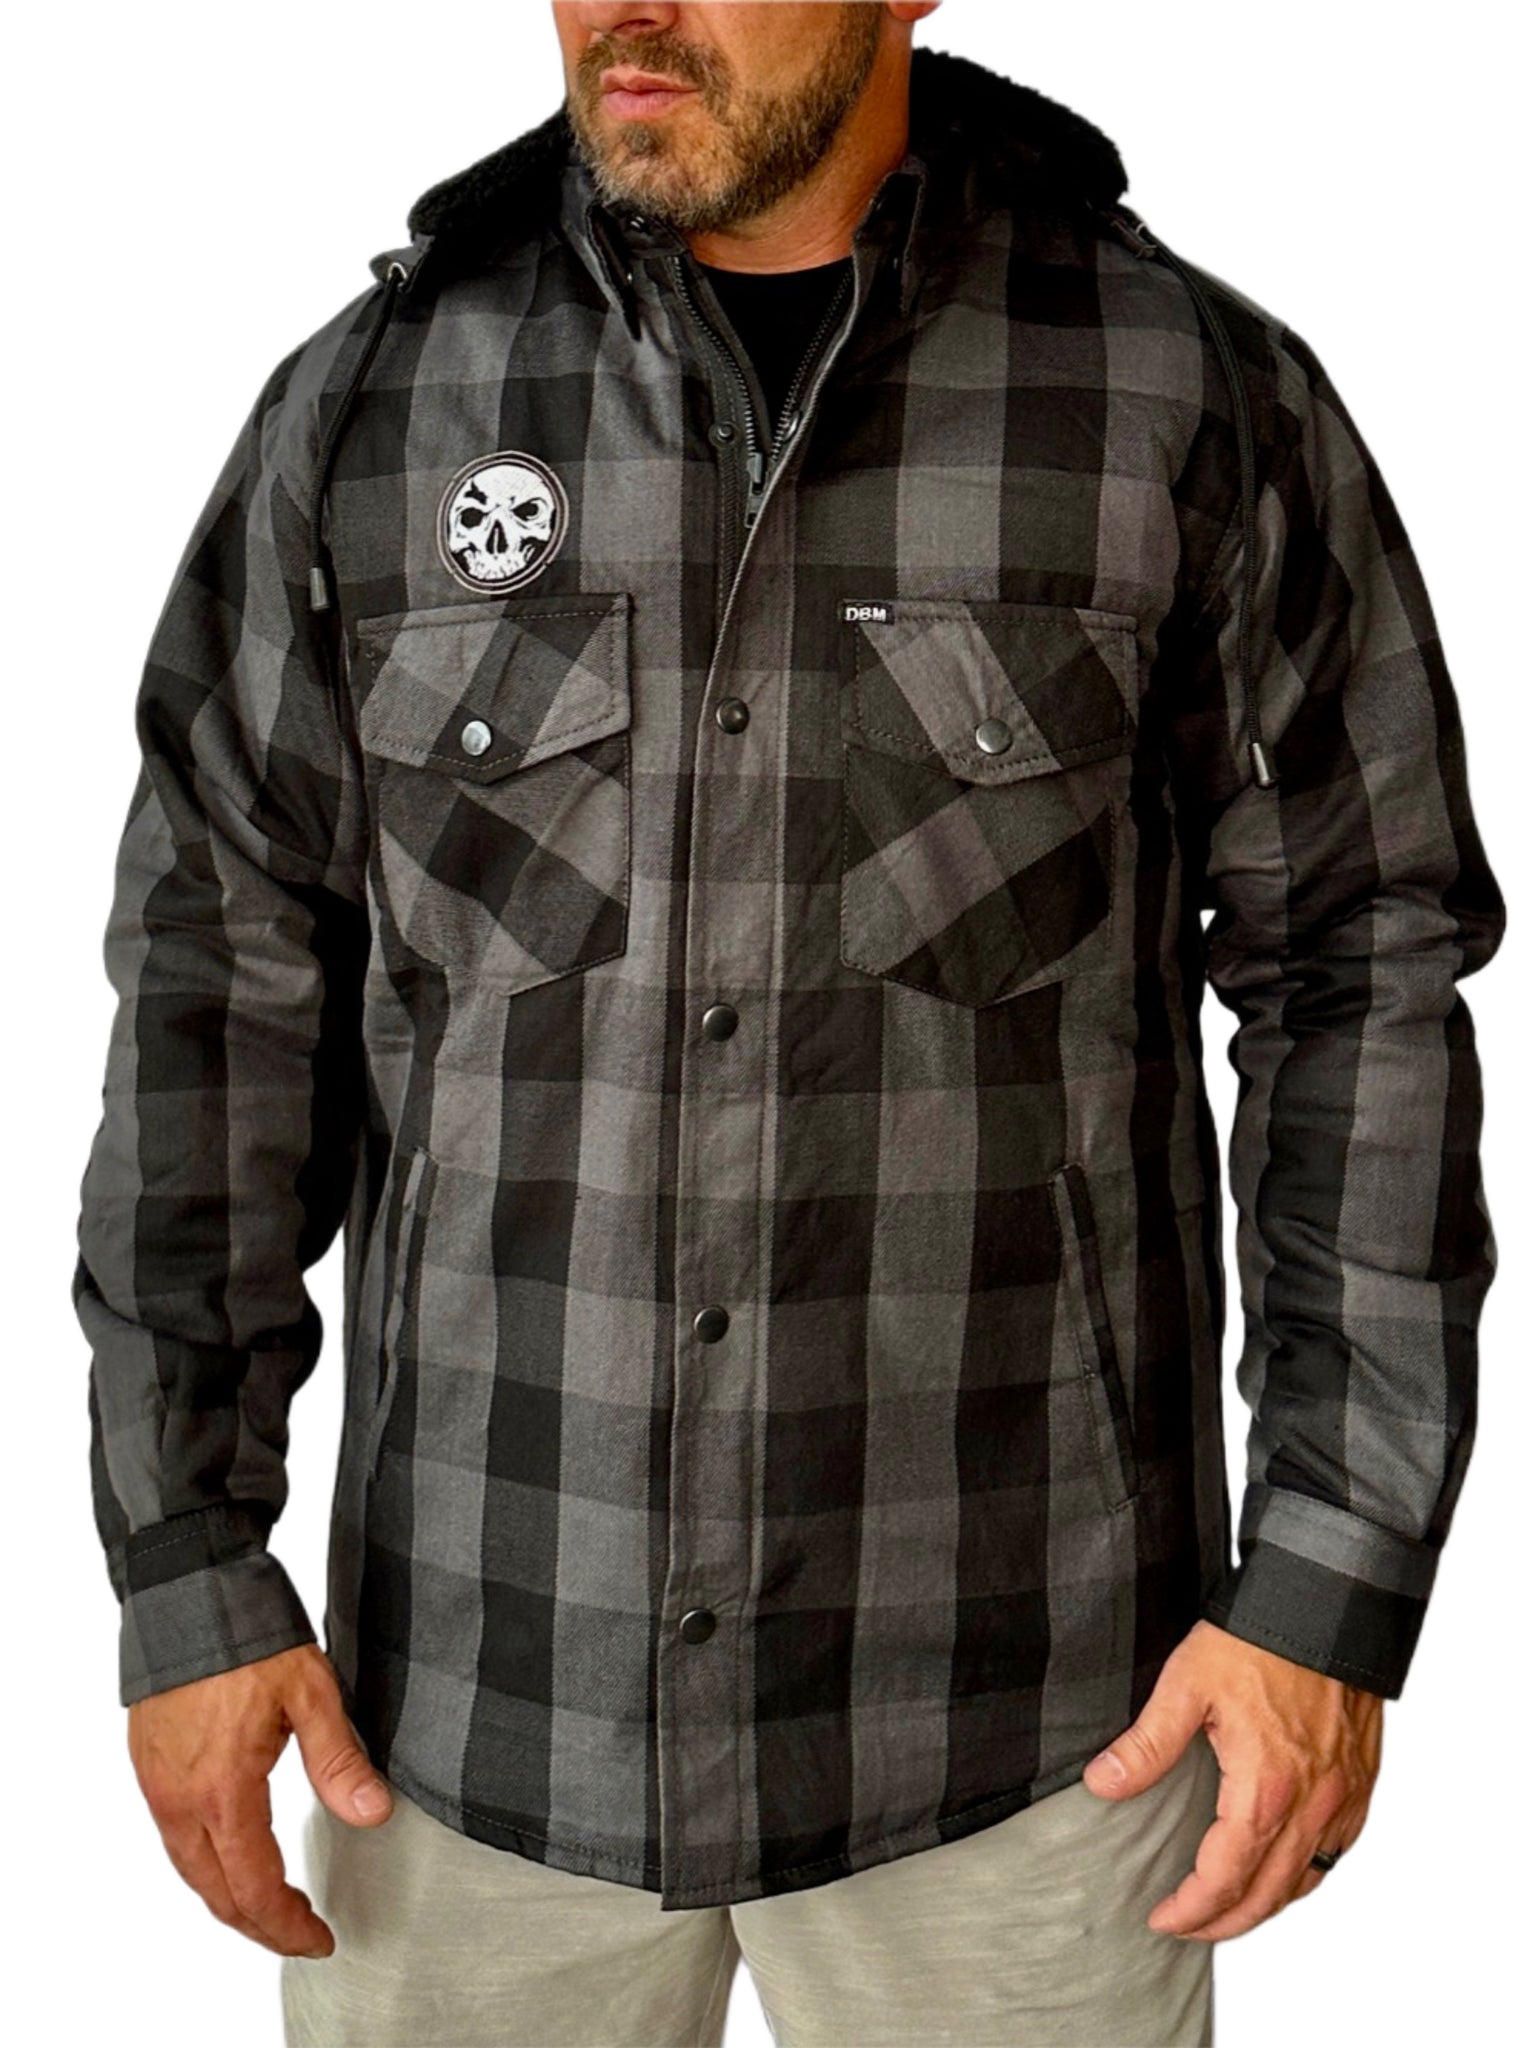 NEW! Heavy-Duty Charcoal & Black Embroidered Flannel Jacket (Removable Hood)